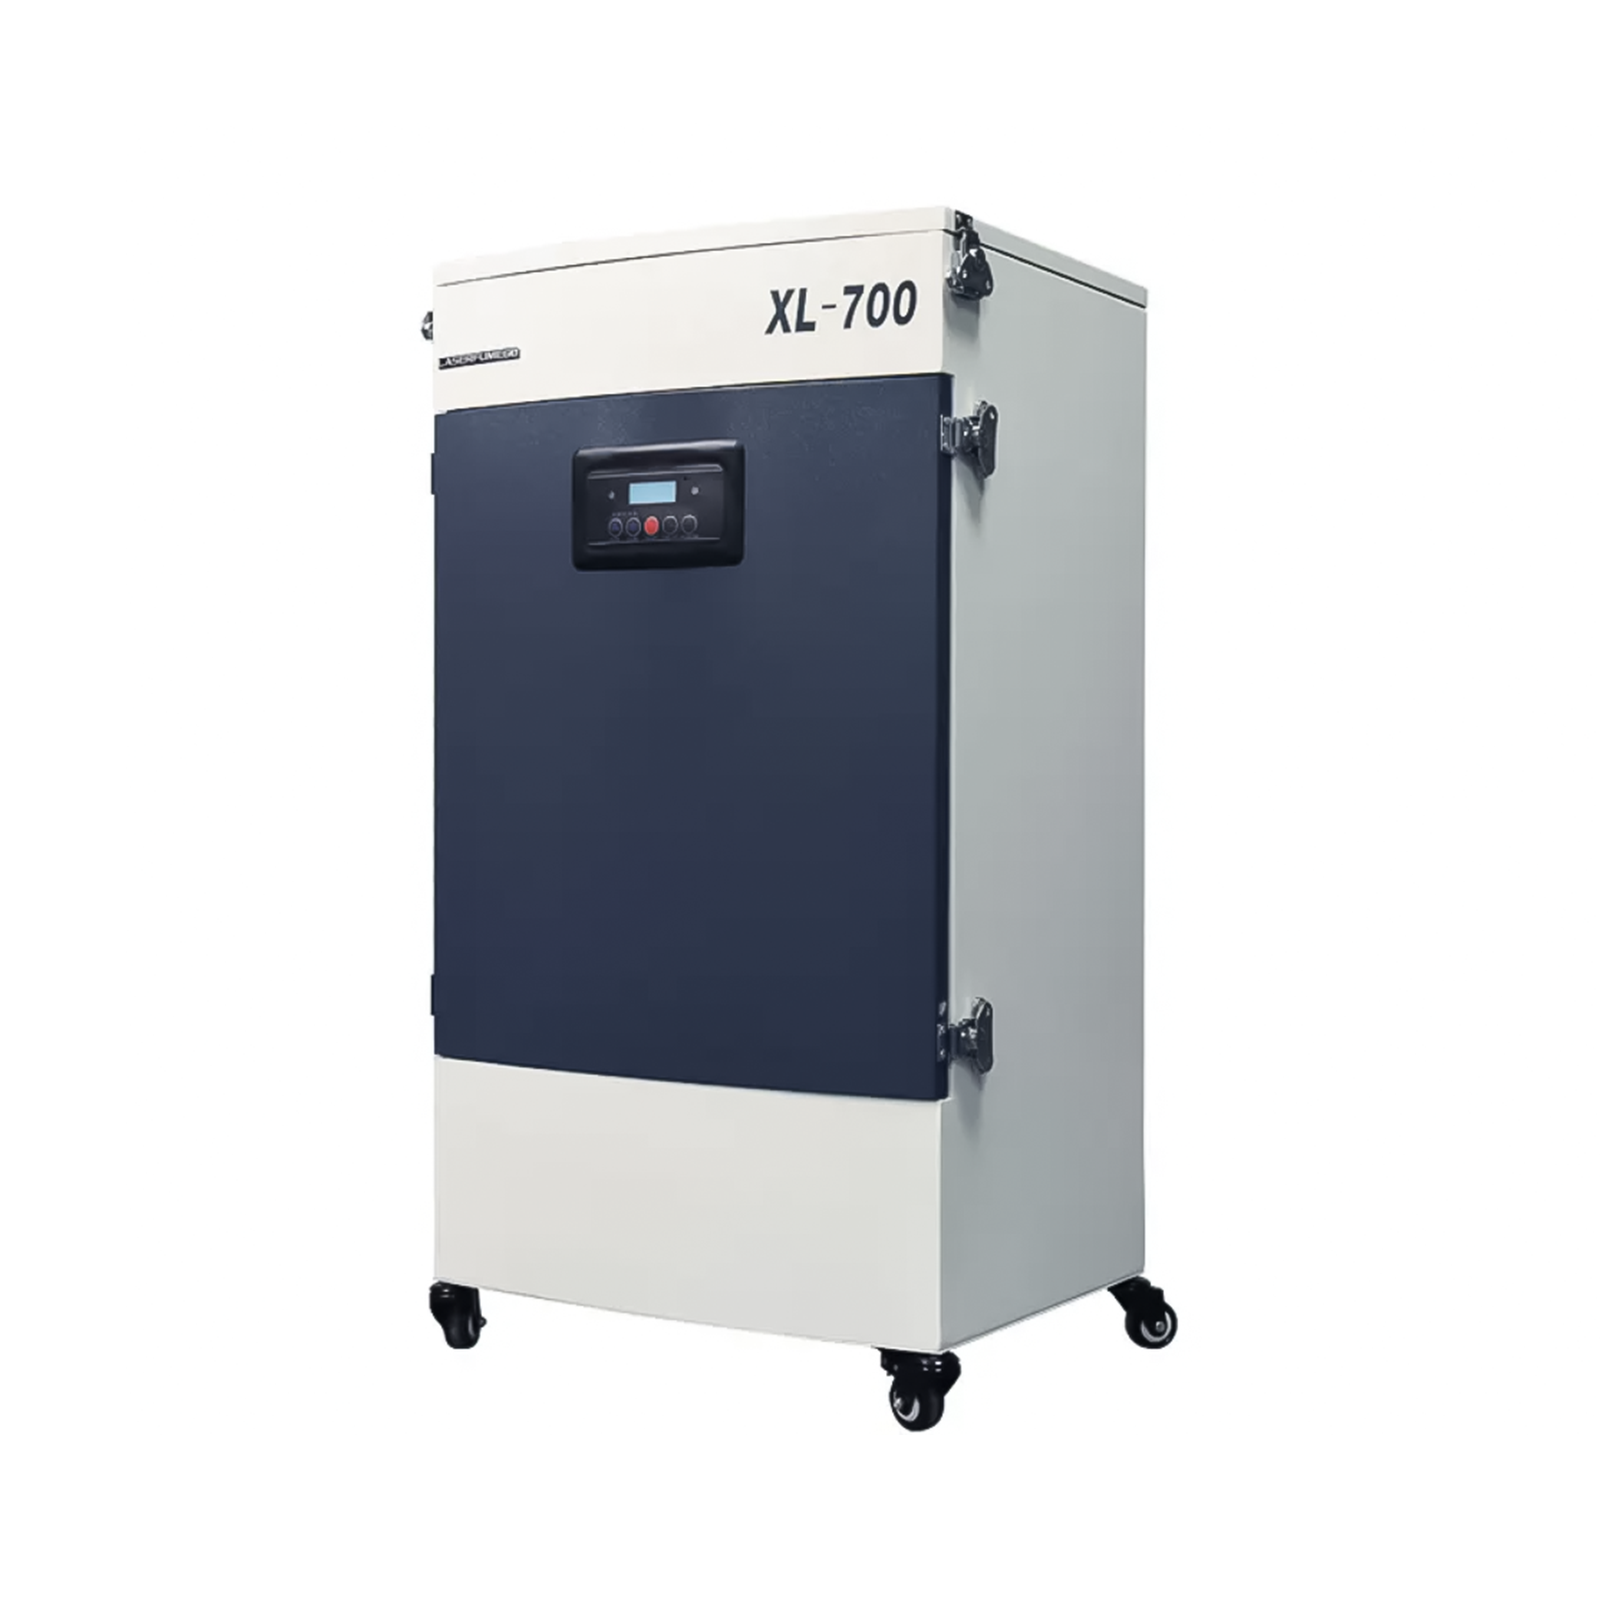 MCWlaser Smoke Purifier XL-700 Filter Fume Extraction System